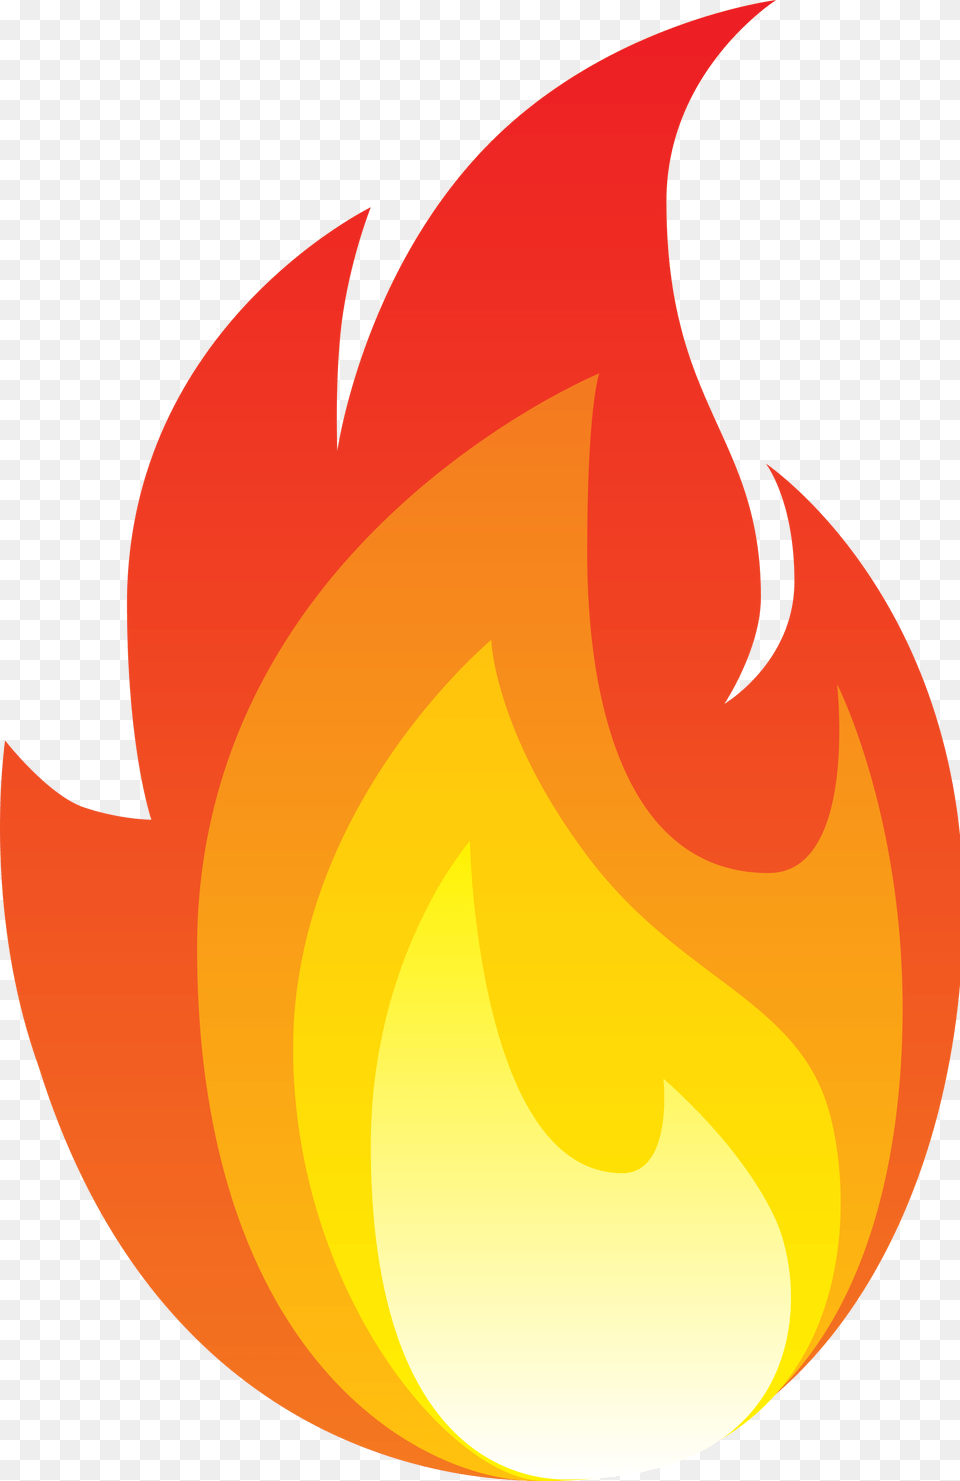 File Fireicon Wikimedia Commons Flames Svg, Fire, Flame, Astronomy, Moon Free Png Download